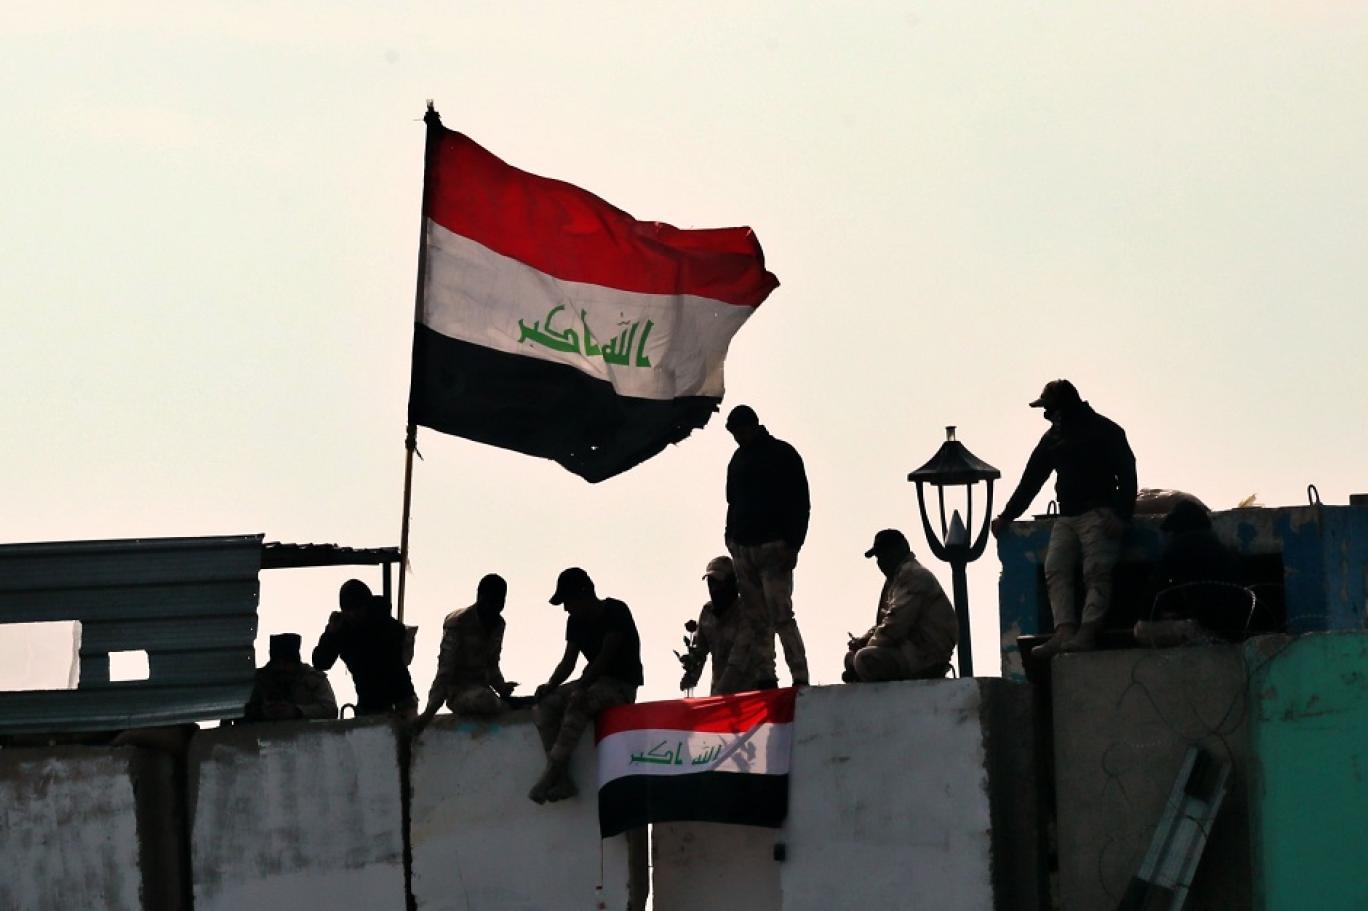 Iraq recalls "victory" over ISIS amid bloody protests